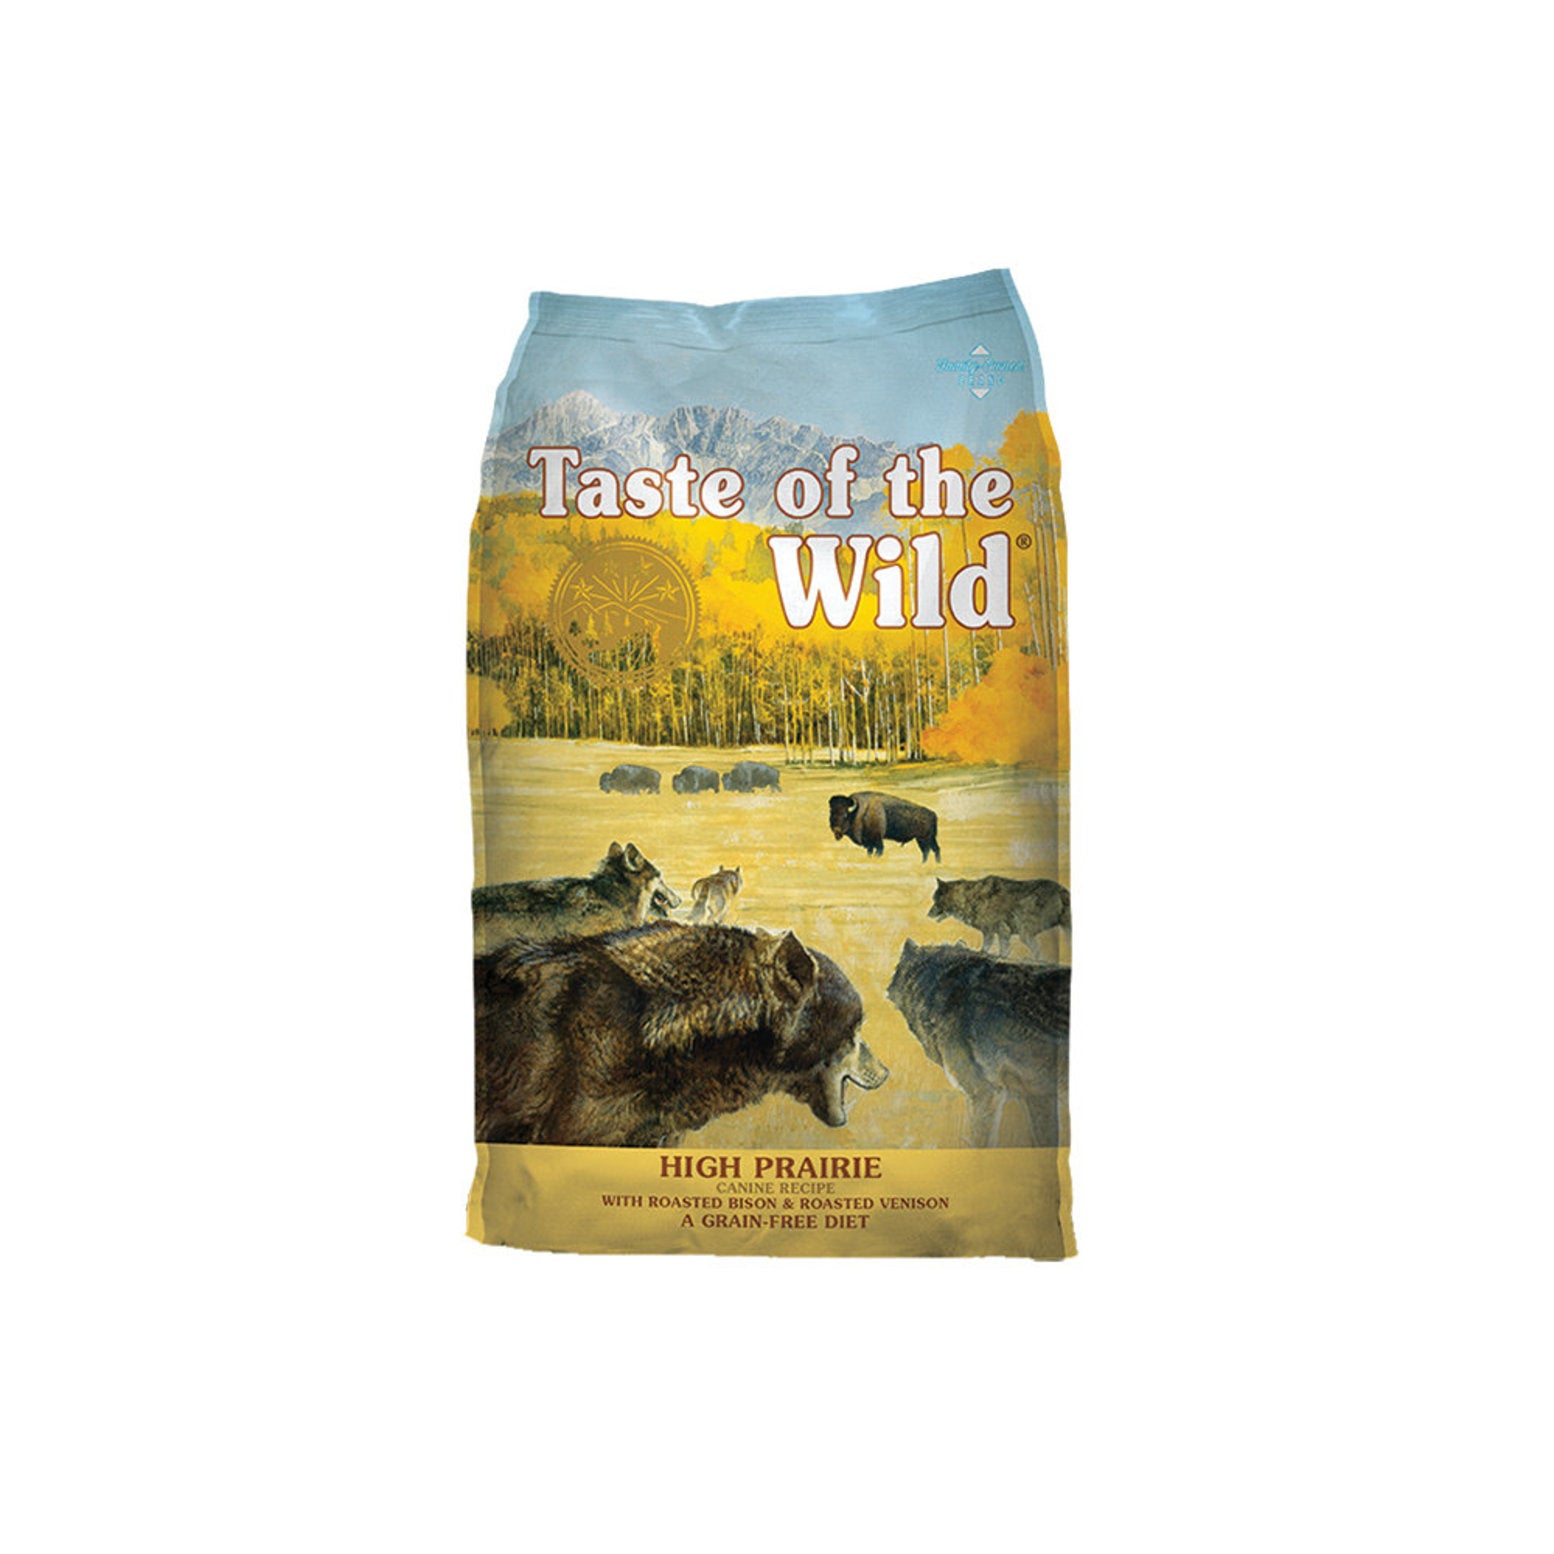 Taste of the Wild - High Prairie with Roasted Bison & Roasted Venison (Dry Grain-Free Dog Food) - ARMOR THE POOCH